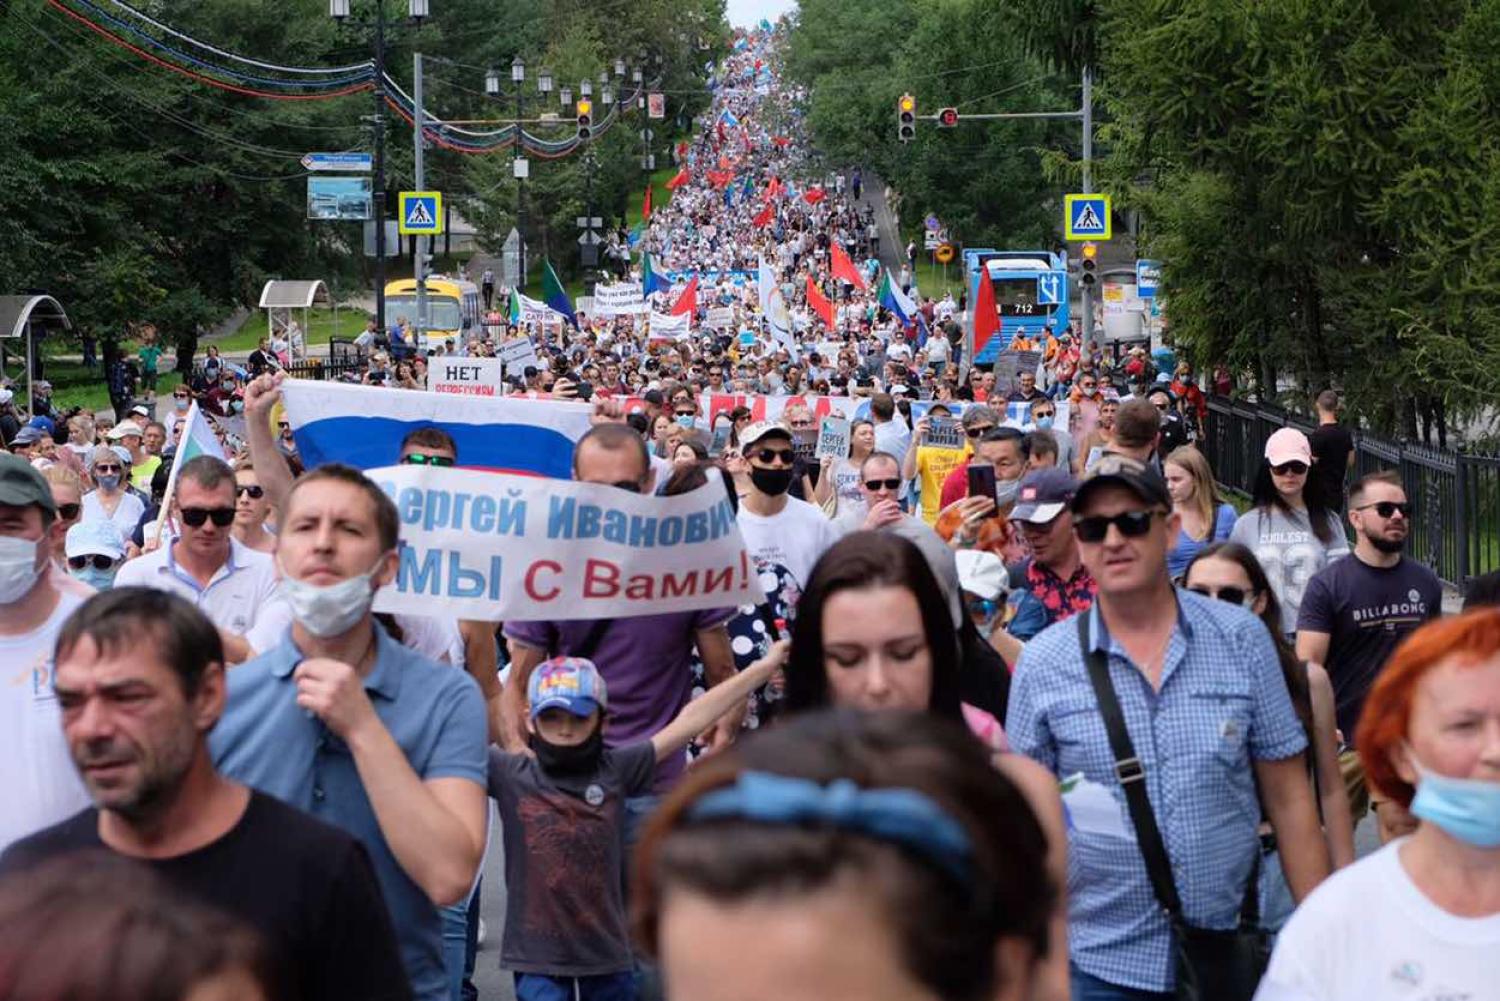 An unsanctioned rally against the arrest of Khabarovsk territory governor Sergei Furgal. The protests have been held in the region since 11 July (Dmitry Morgulis/TASS via Getty Images)